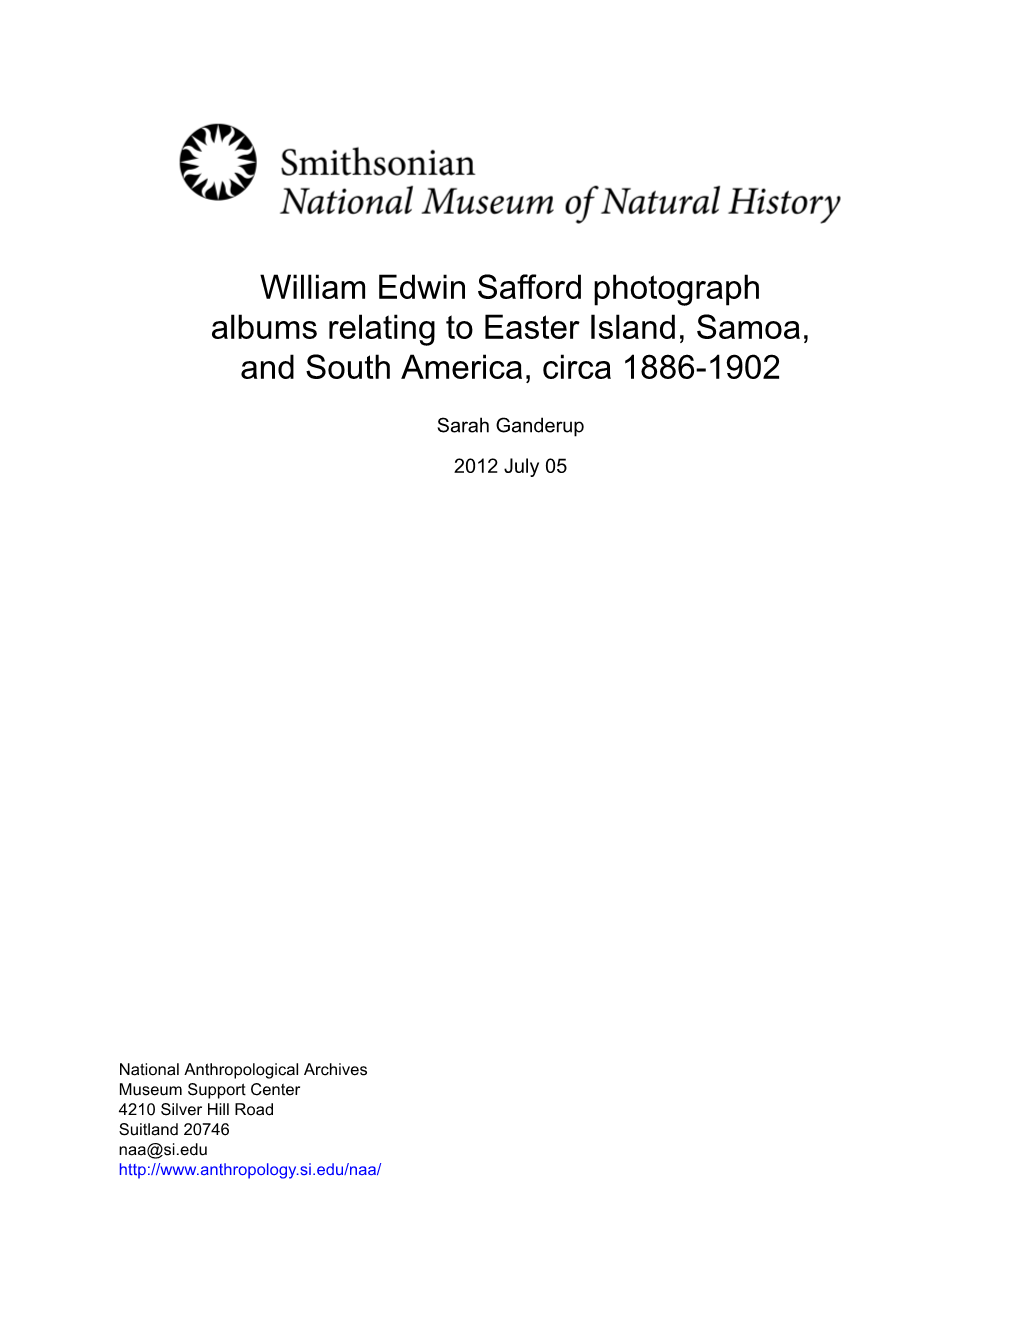 William Edwin Safford Photograph Albums Relating to Easter Island, Samoa, and South America, Circa 1886-1902